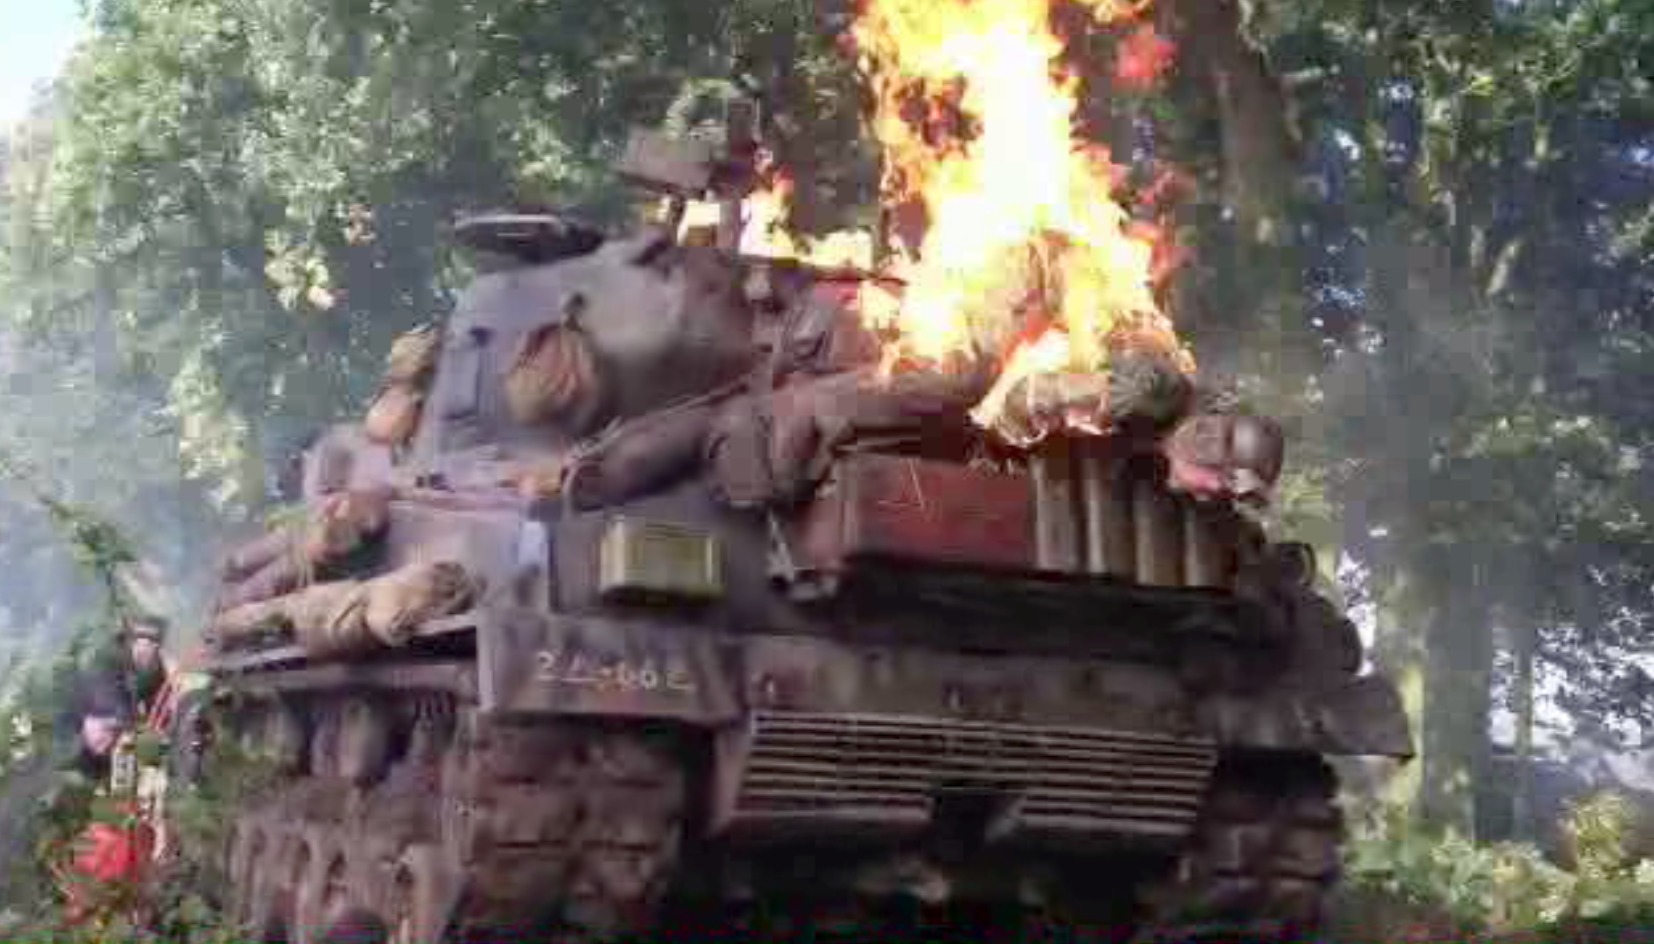 Sean falling from a tank on fire in this Taurus World Stunt Award winning specialty Stunt on David Ayer's 